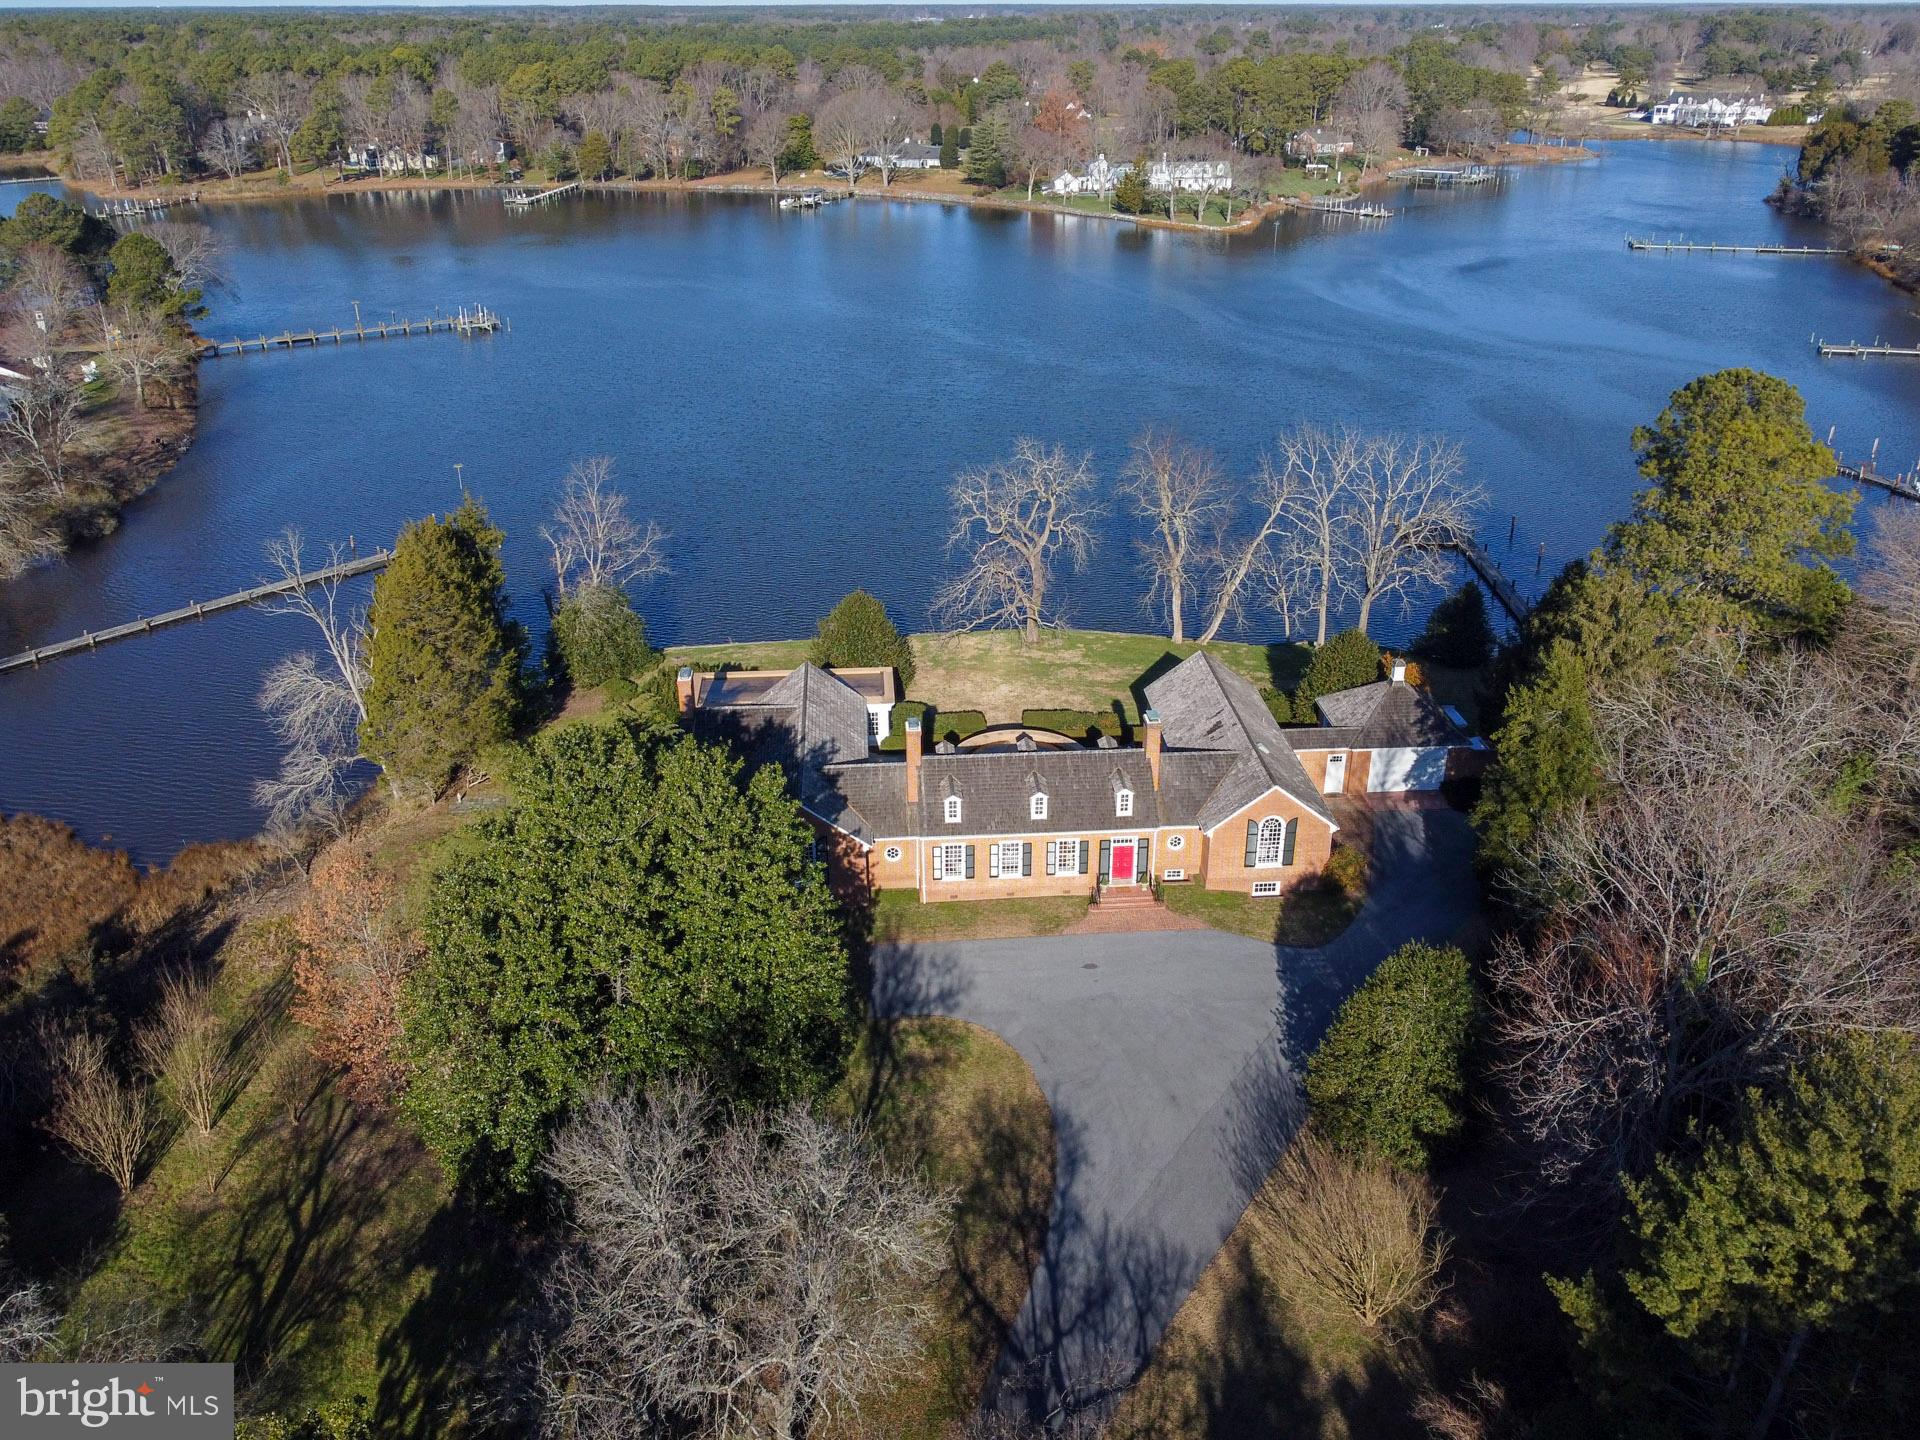 an aerial view of a house with a yard lake view